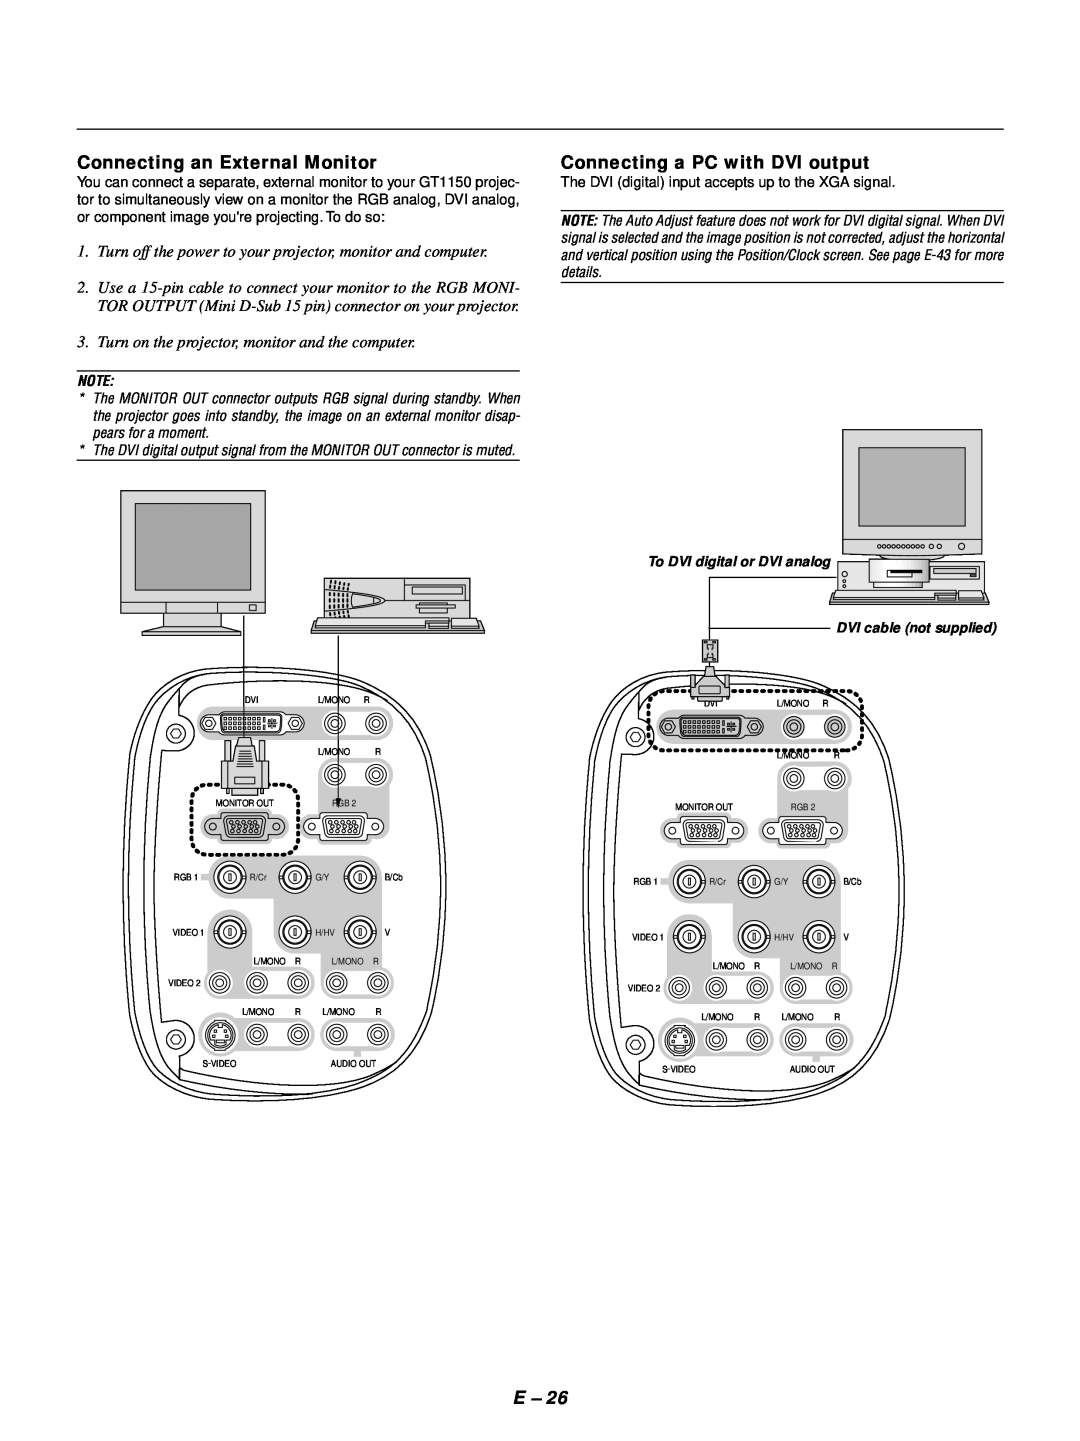 NEC GT1150 user manual Connecting an External Monitor, Connecting a PC with DVI output, DVI cable not supplied 